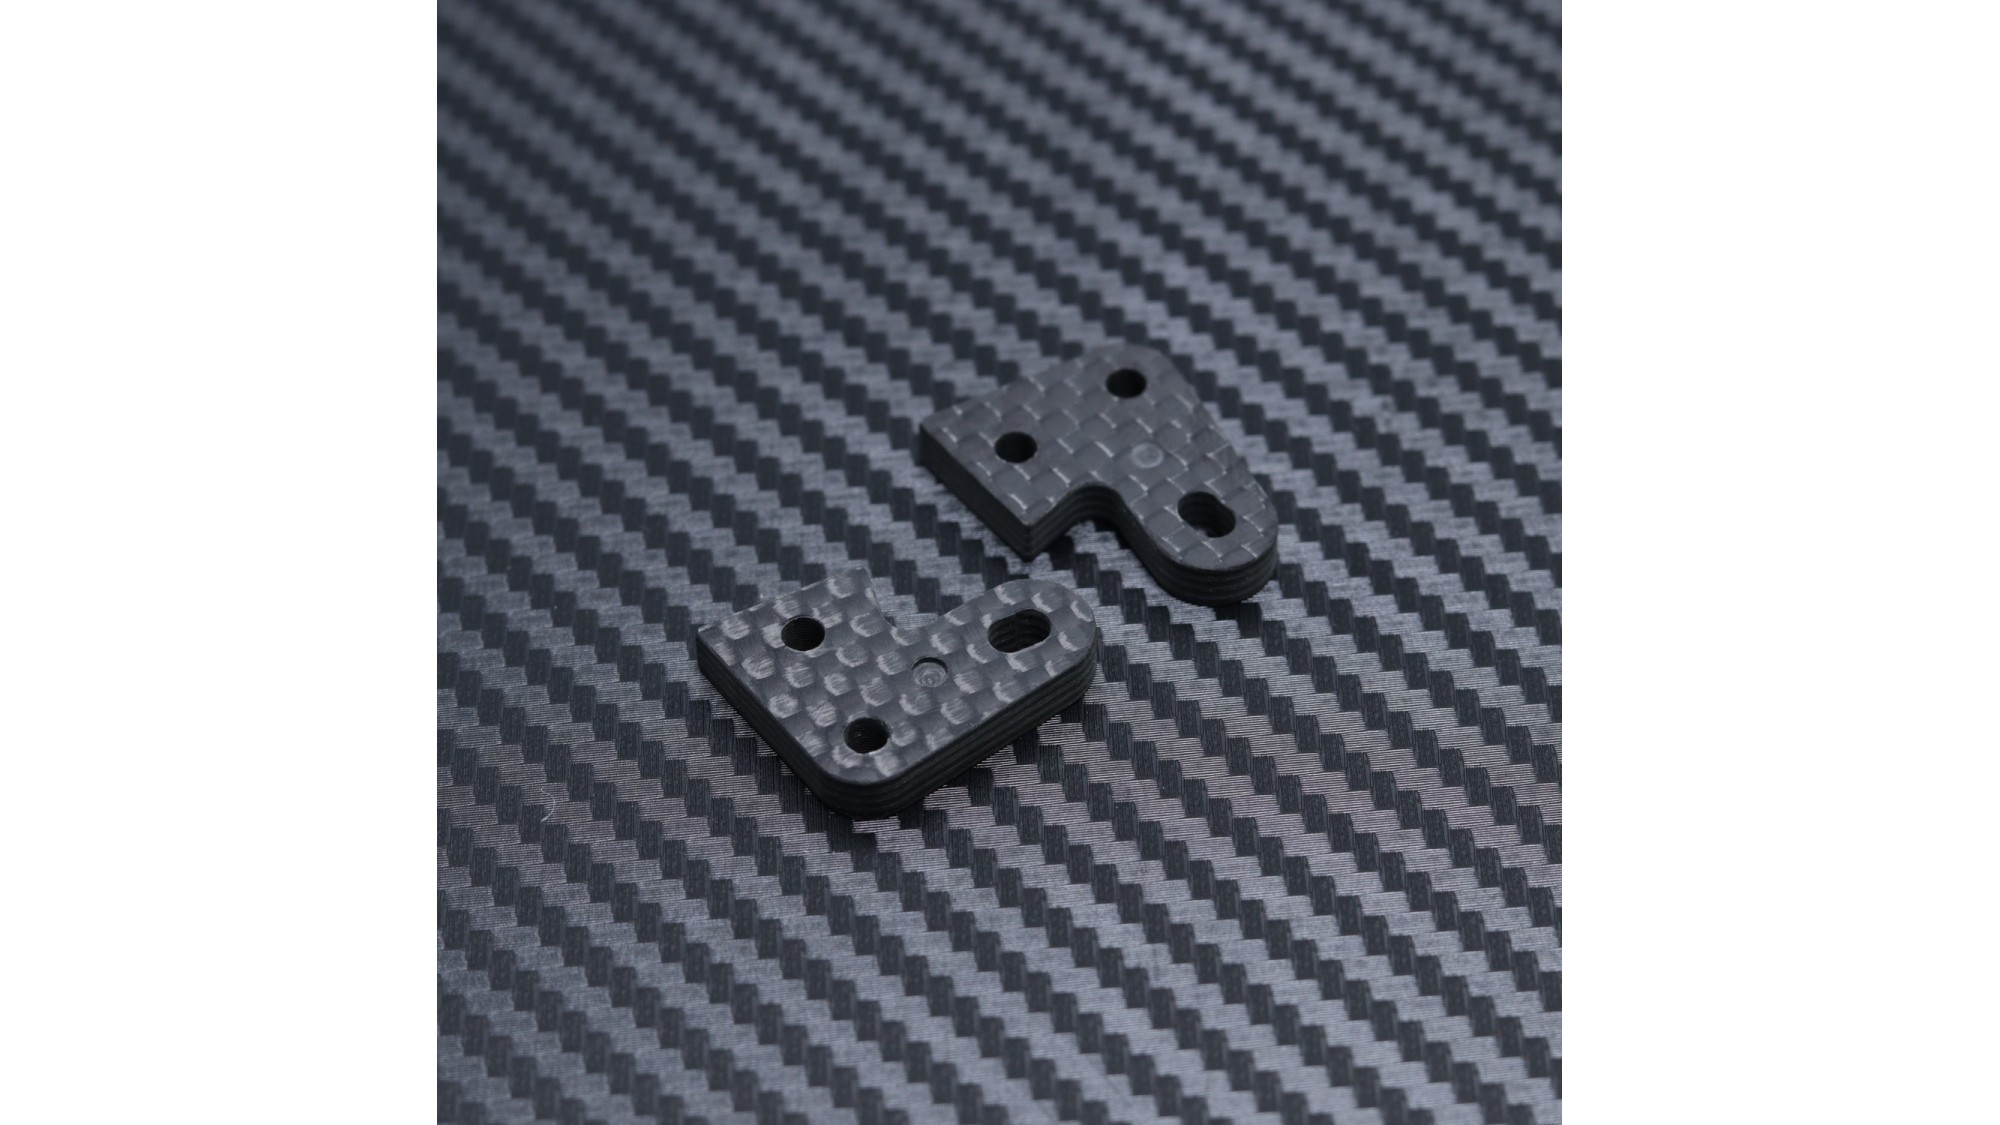 [MYB0044-01] Carbon Fibre Steering Knuckle Plate 1 (Long) for Mayako MX8 (-21)